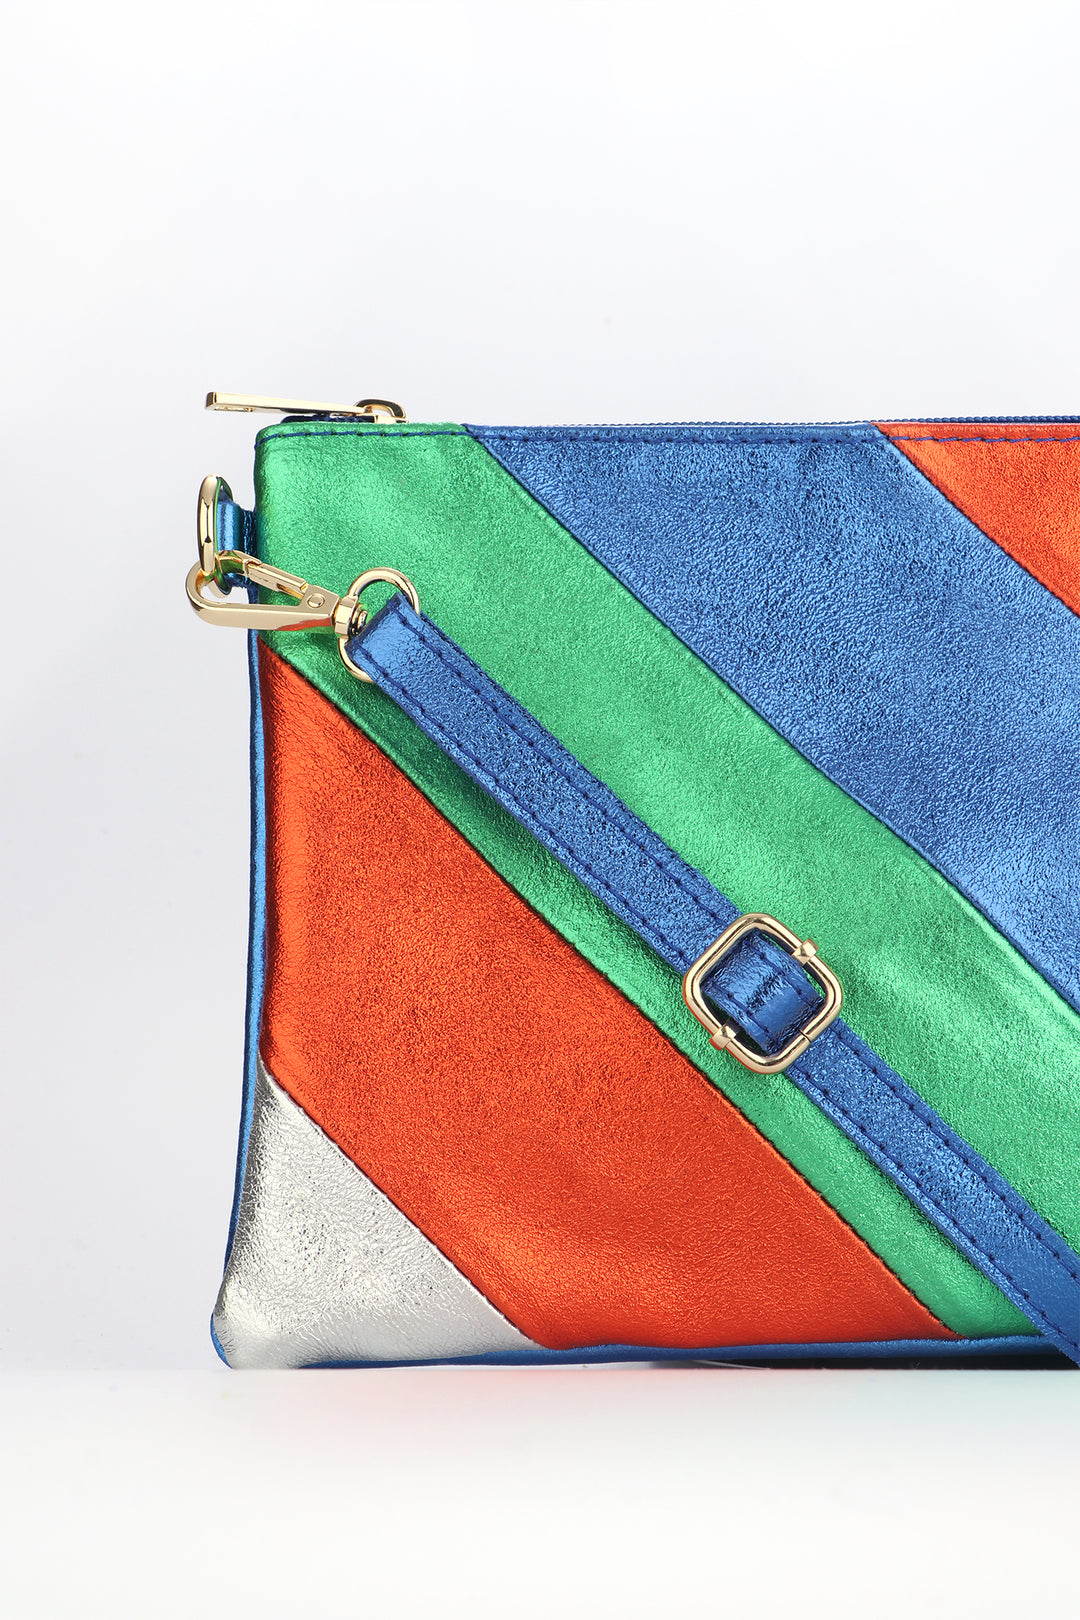 close up of the striped leather clutch bag showing the blue crossbody strap